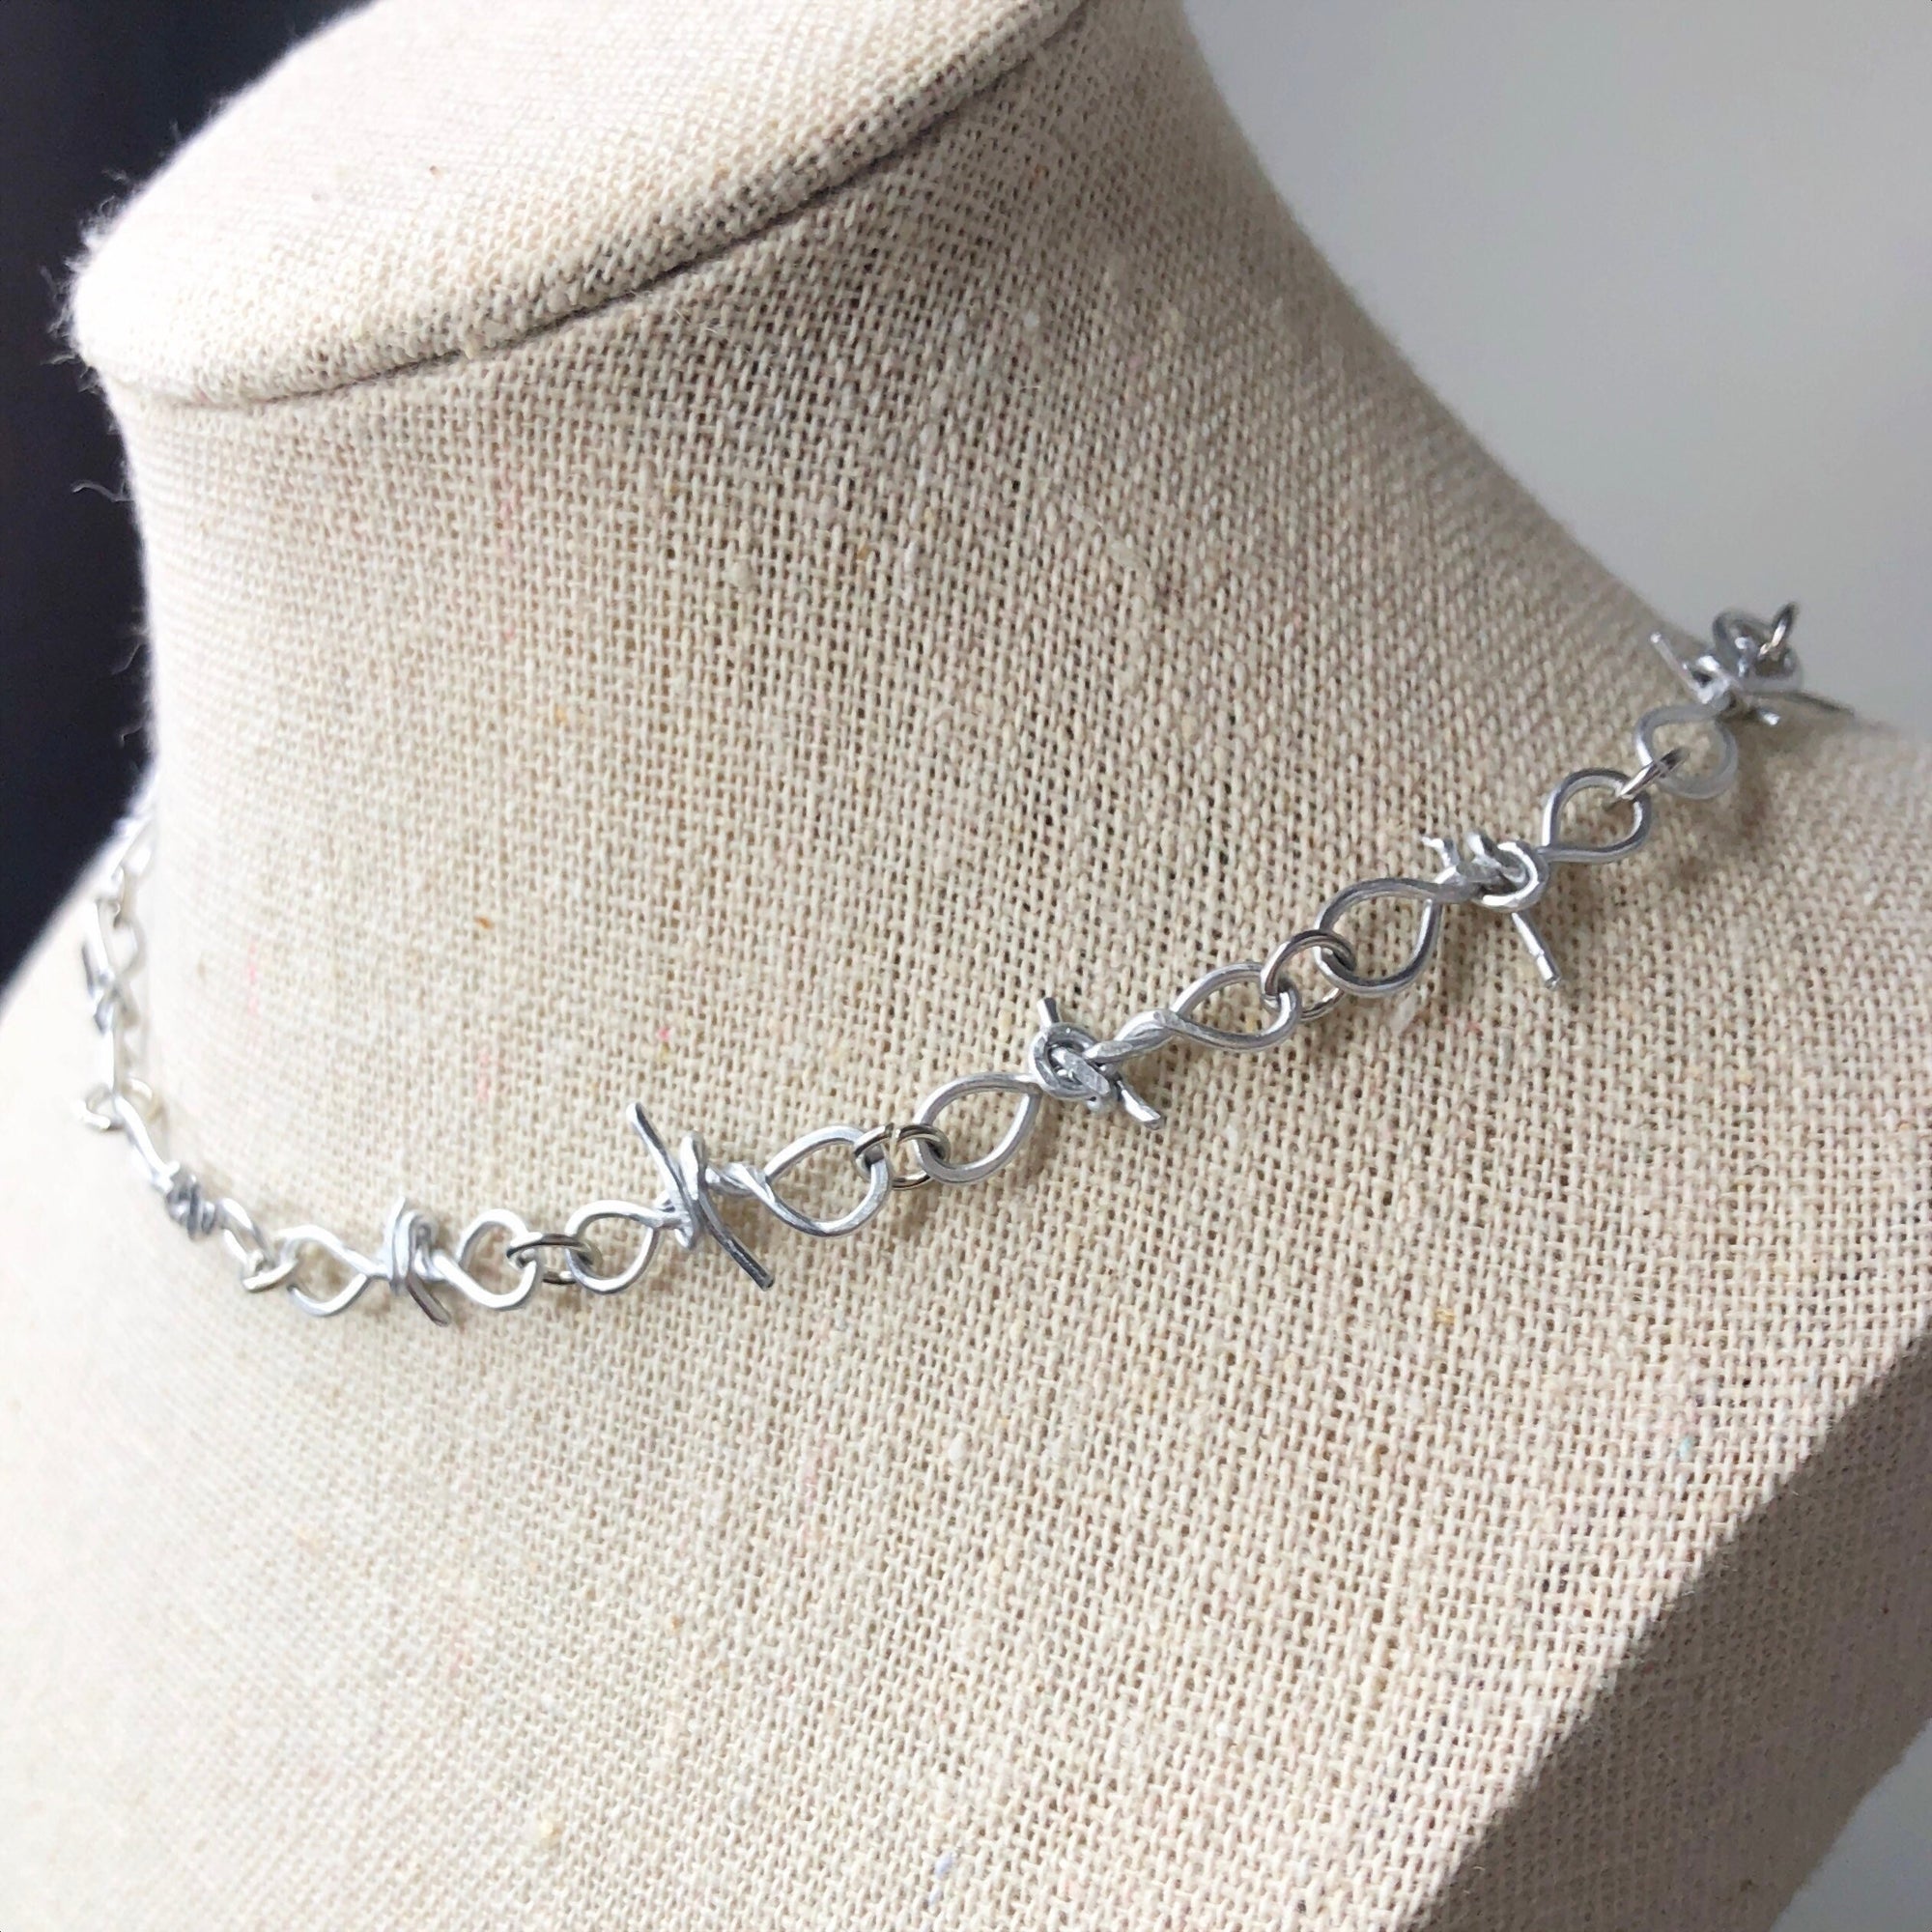 Barbed wire necklace choker • Barbed wire ring bracelet necklace set • Spiked punk choker necklace • Punk ring with thorns silver gold black